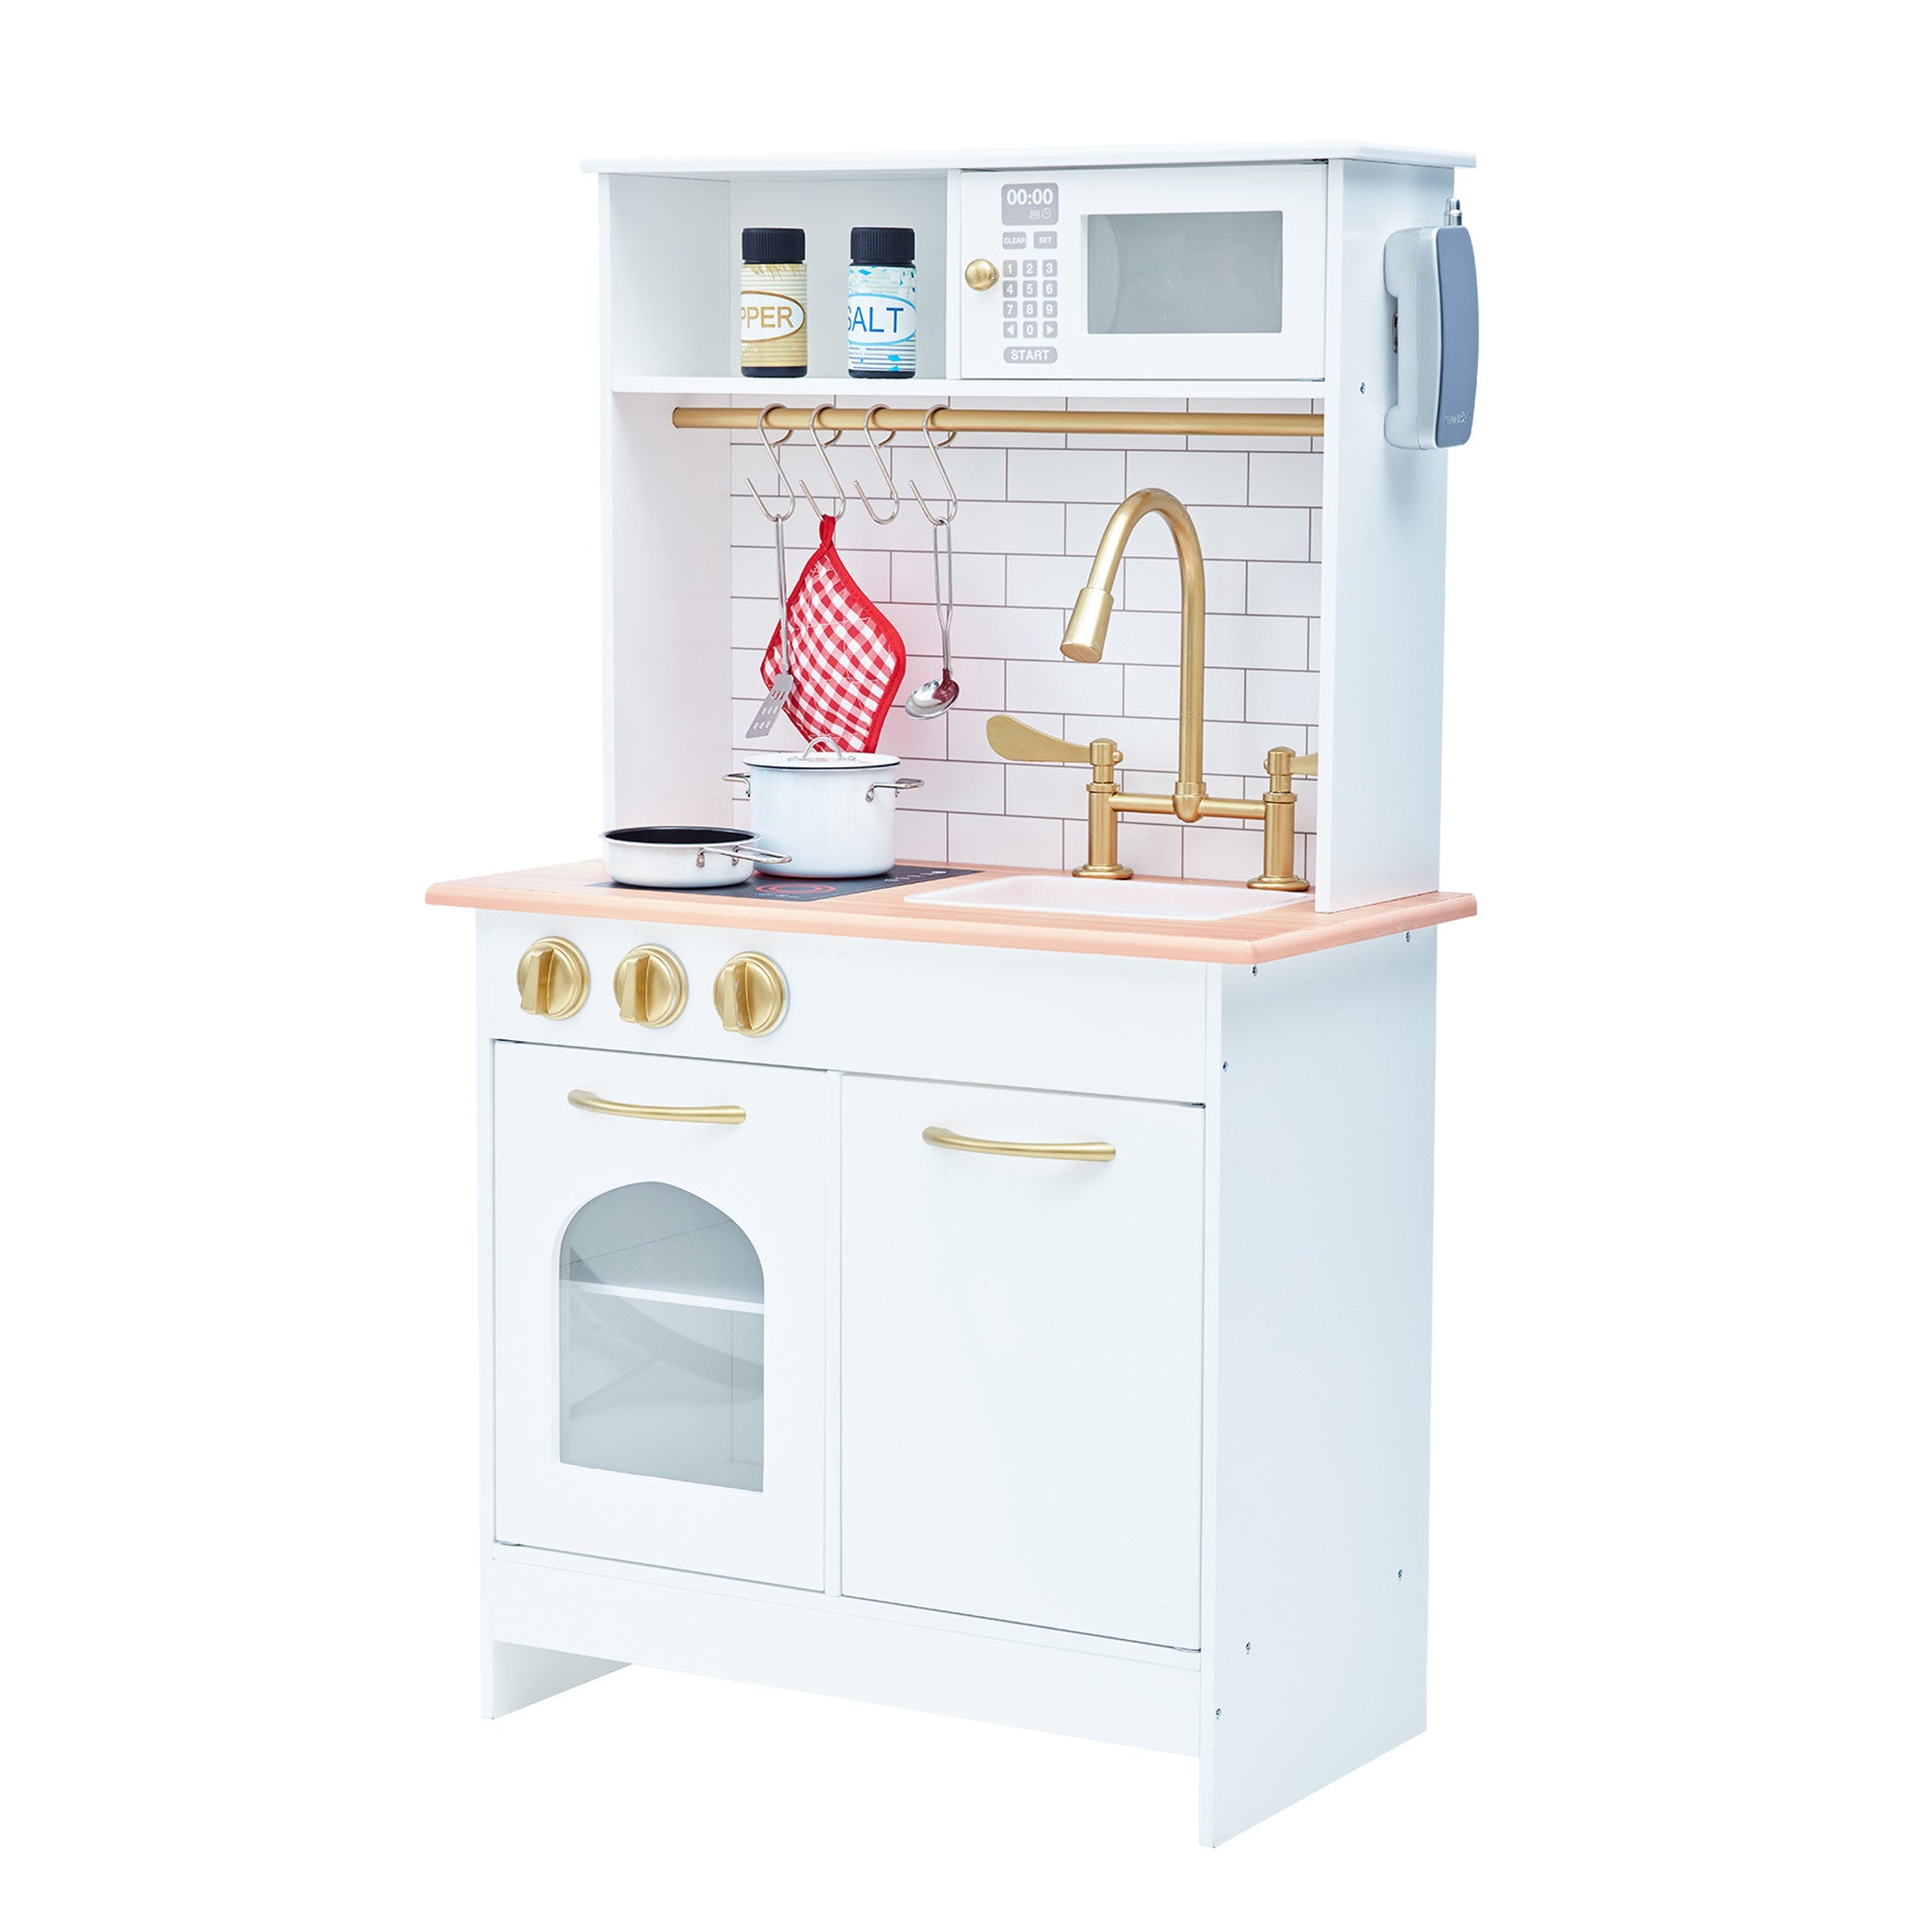 Kids white play kitchen. Small and compact with a sink, microwave, stove and oven. Gold faucet with a brick backsplash. 